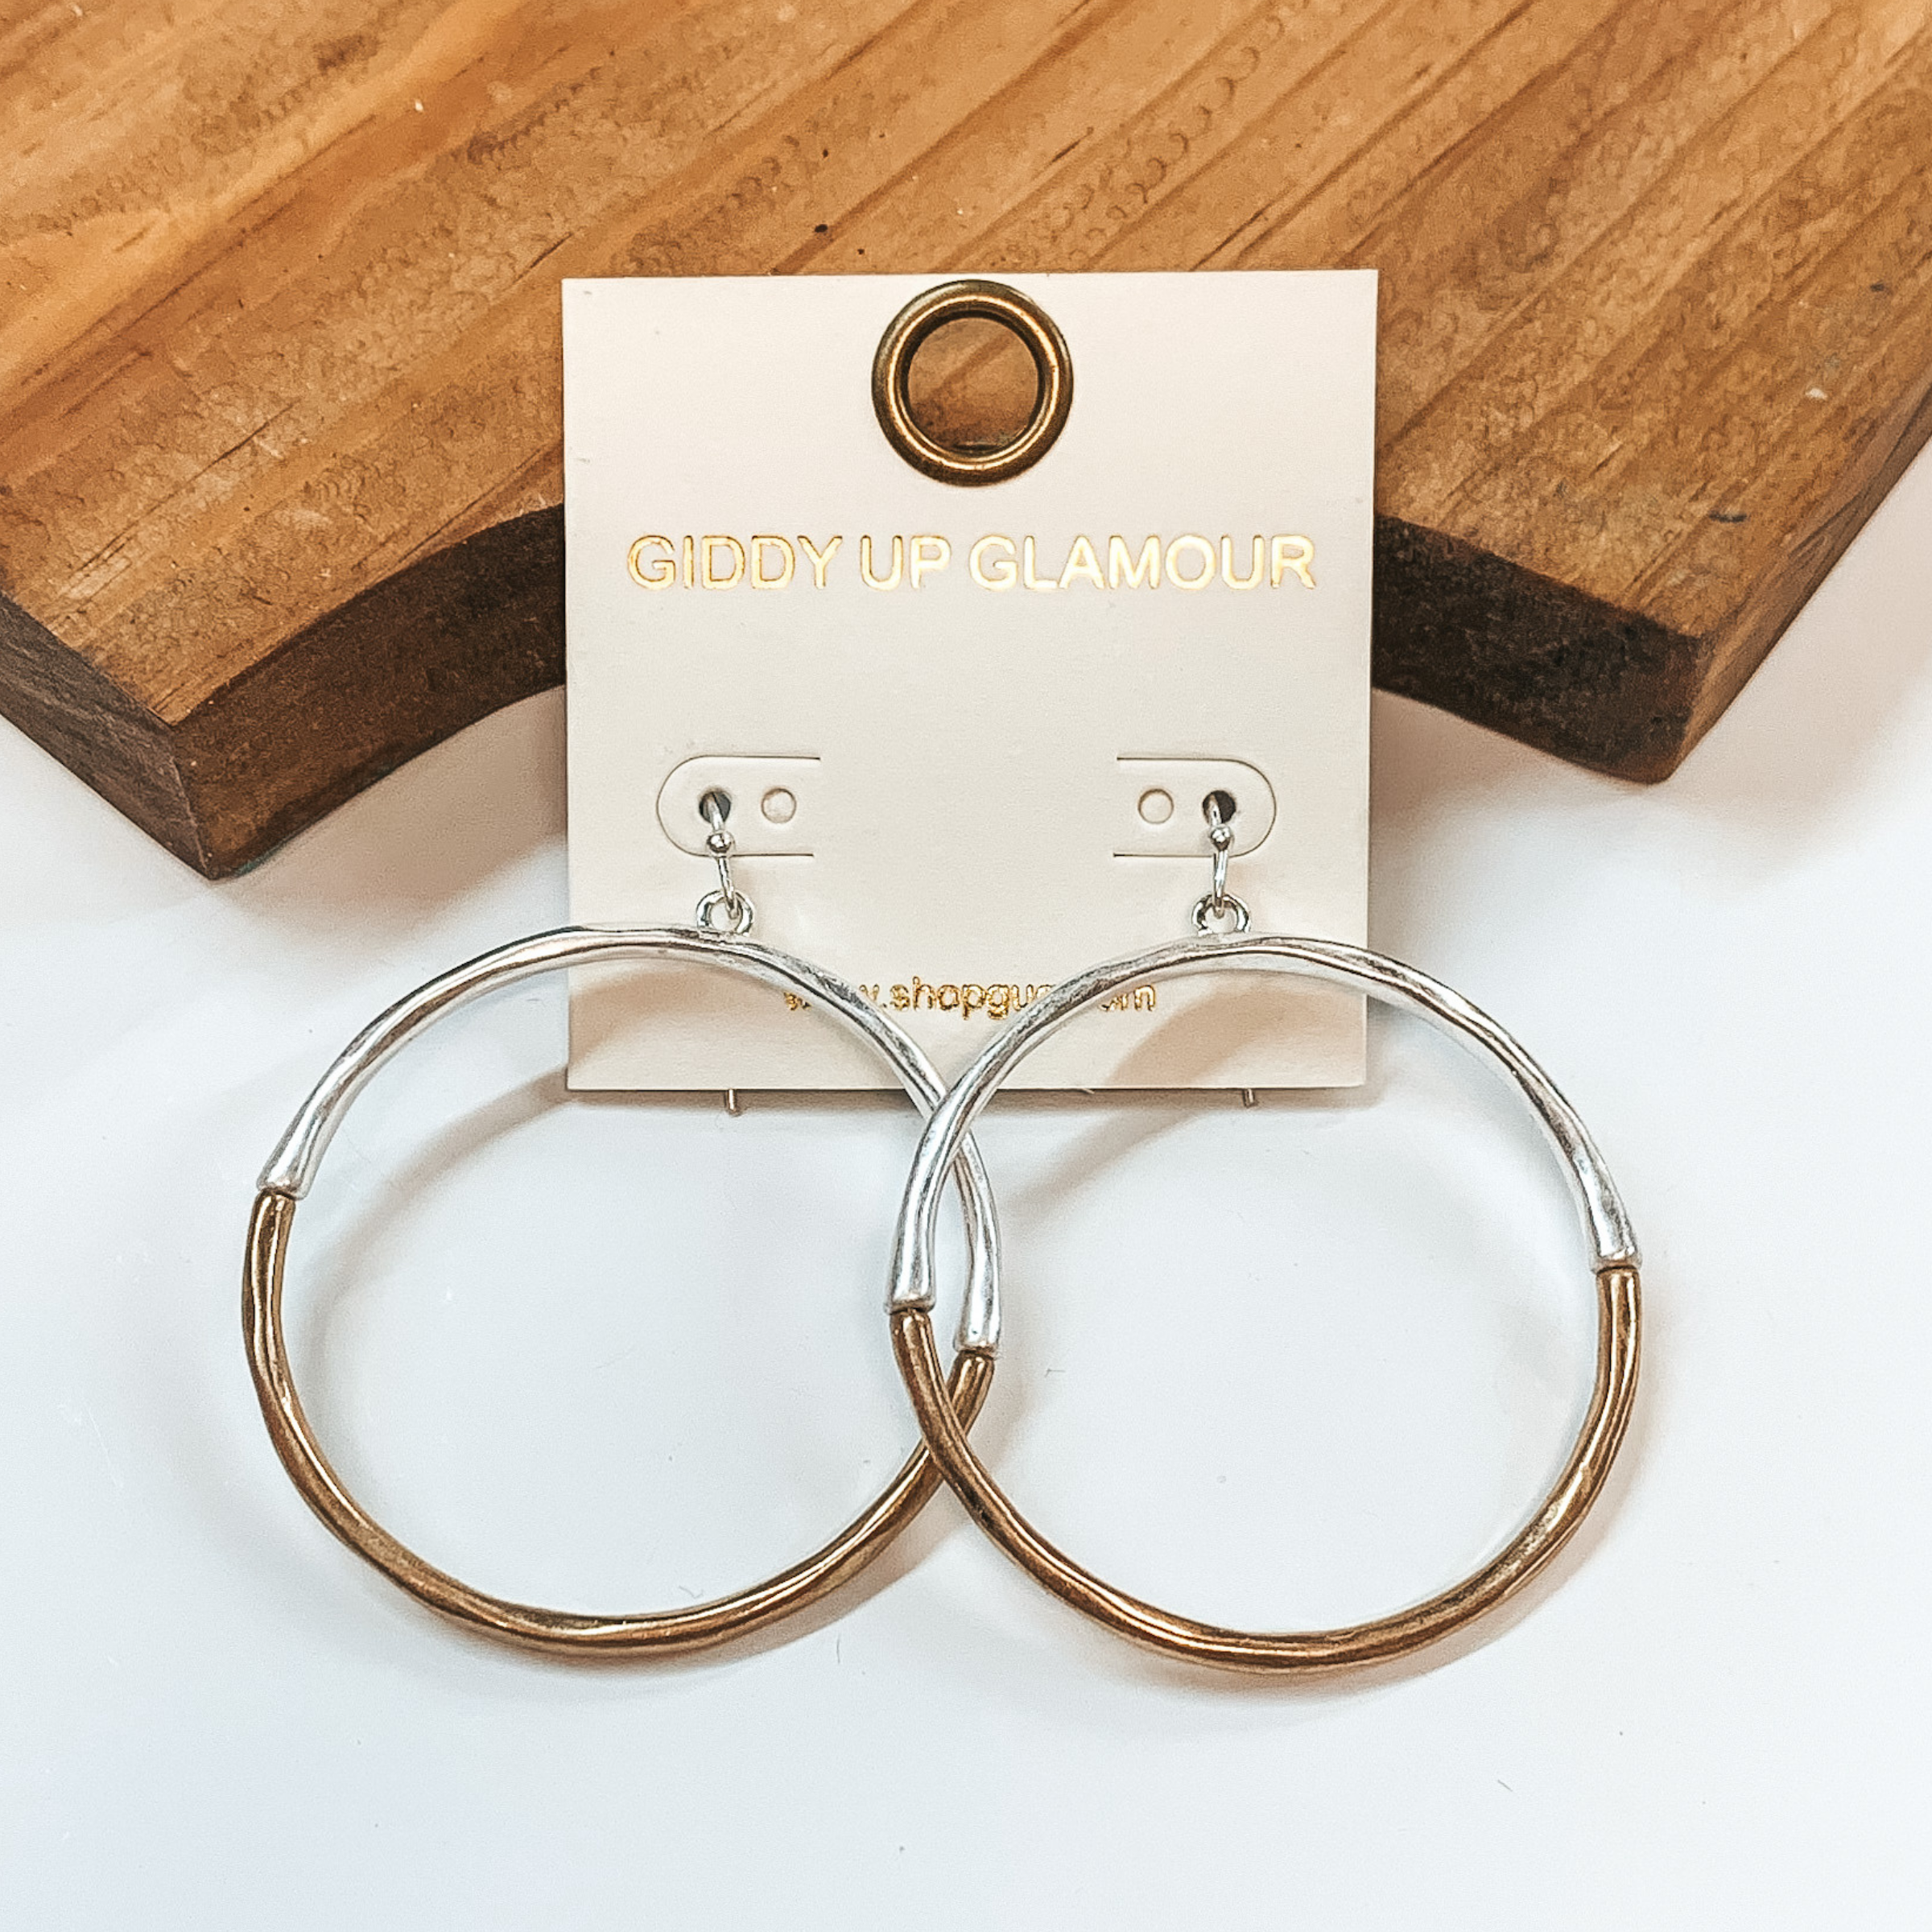 Two toned circle drop earrings with hammered texture. Top half in silver and bottom half in gold. These earrings are pictured on a white background with a brown block in the back.